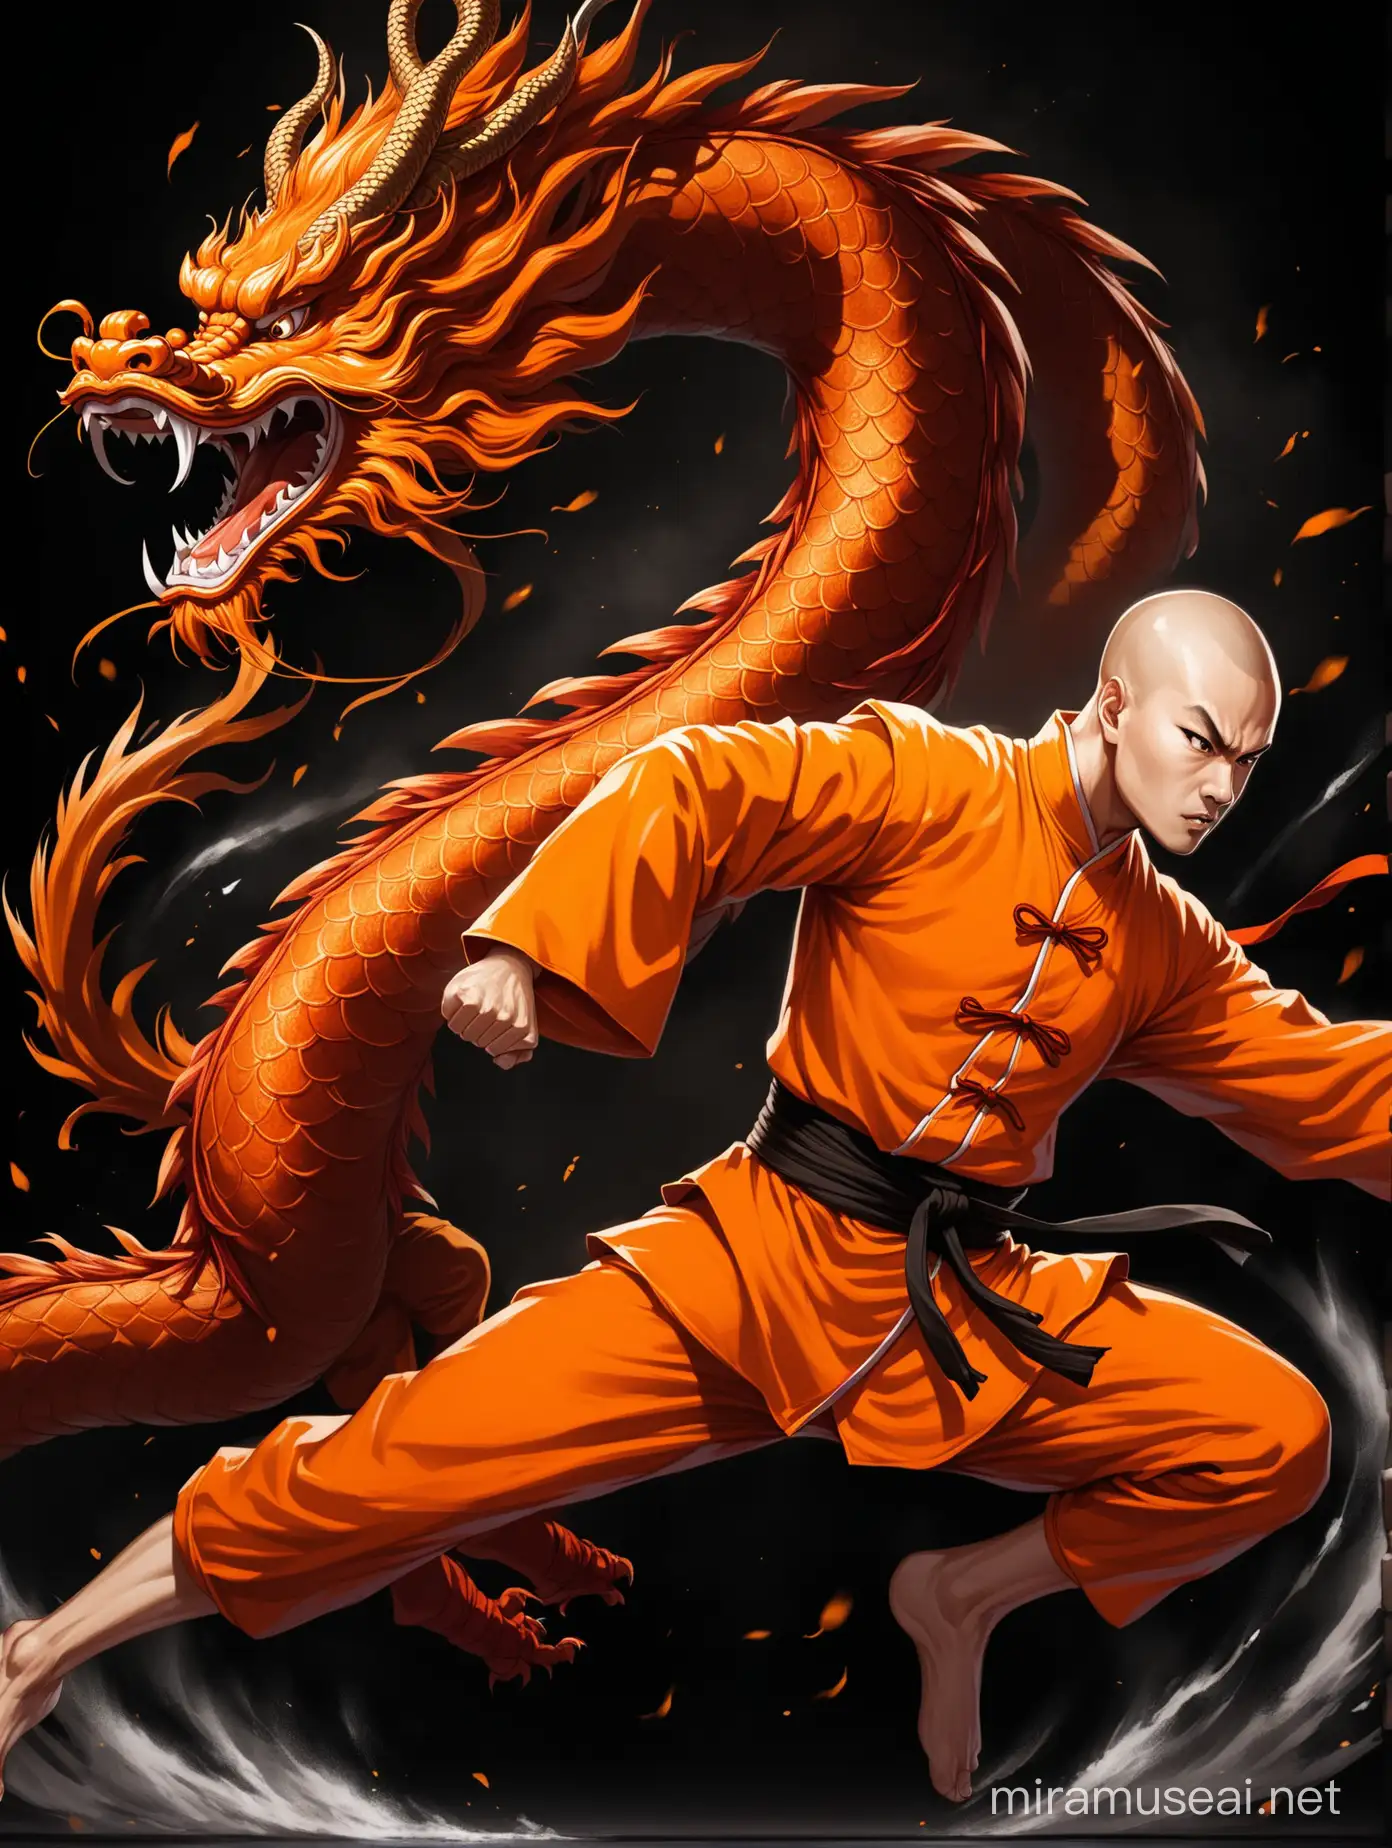 Shaolin monk in orange suit, with Rafał Szulkowski face, fighting with red chinese dragon, dark background